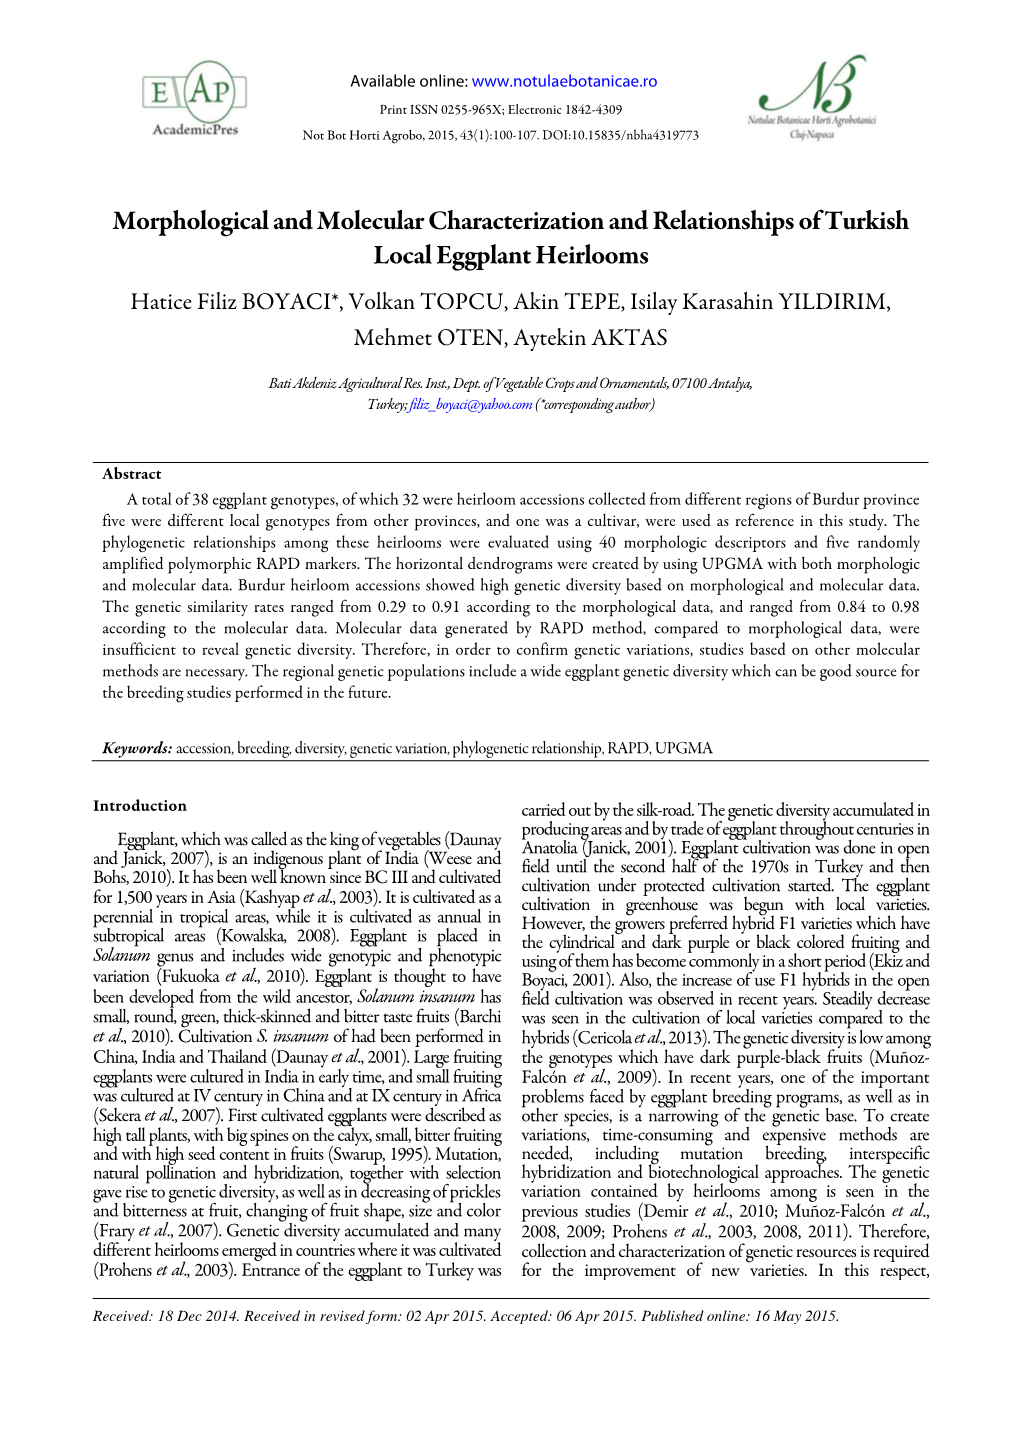 Morphological and Molecular Characterization and Relationships of Turkish Local Eggplant Heirlooms